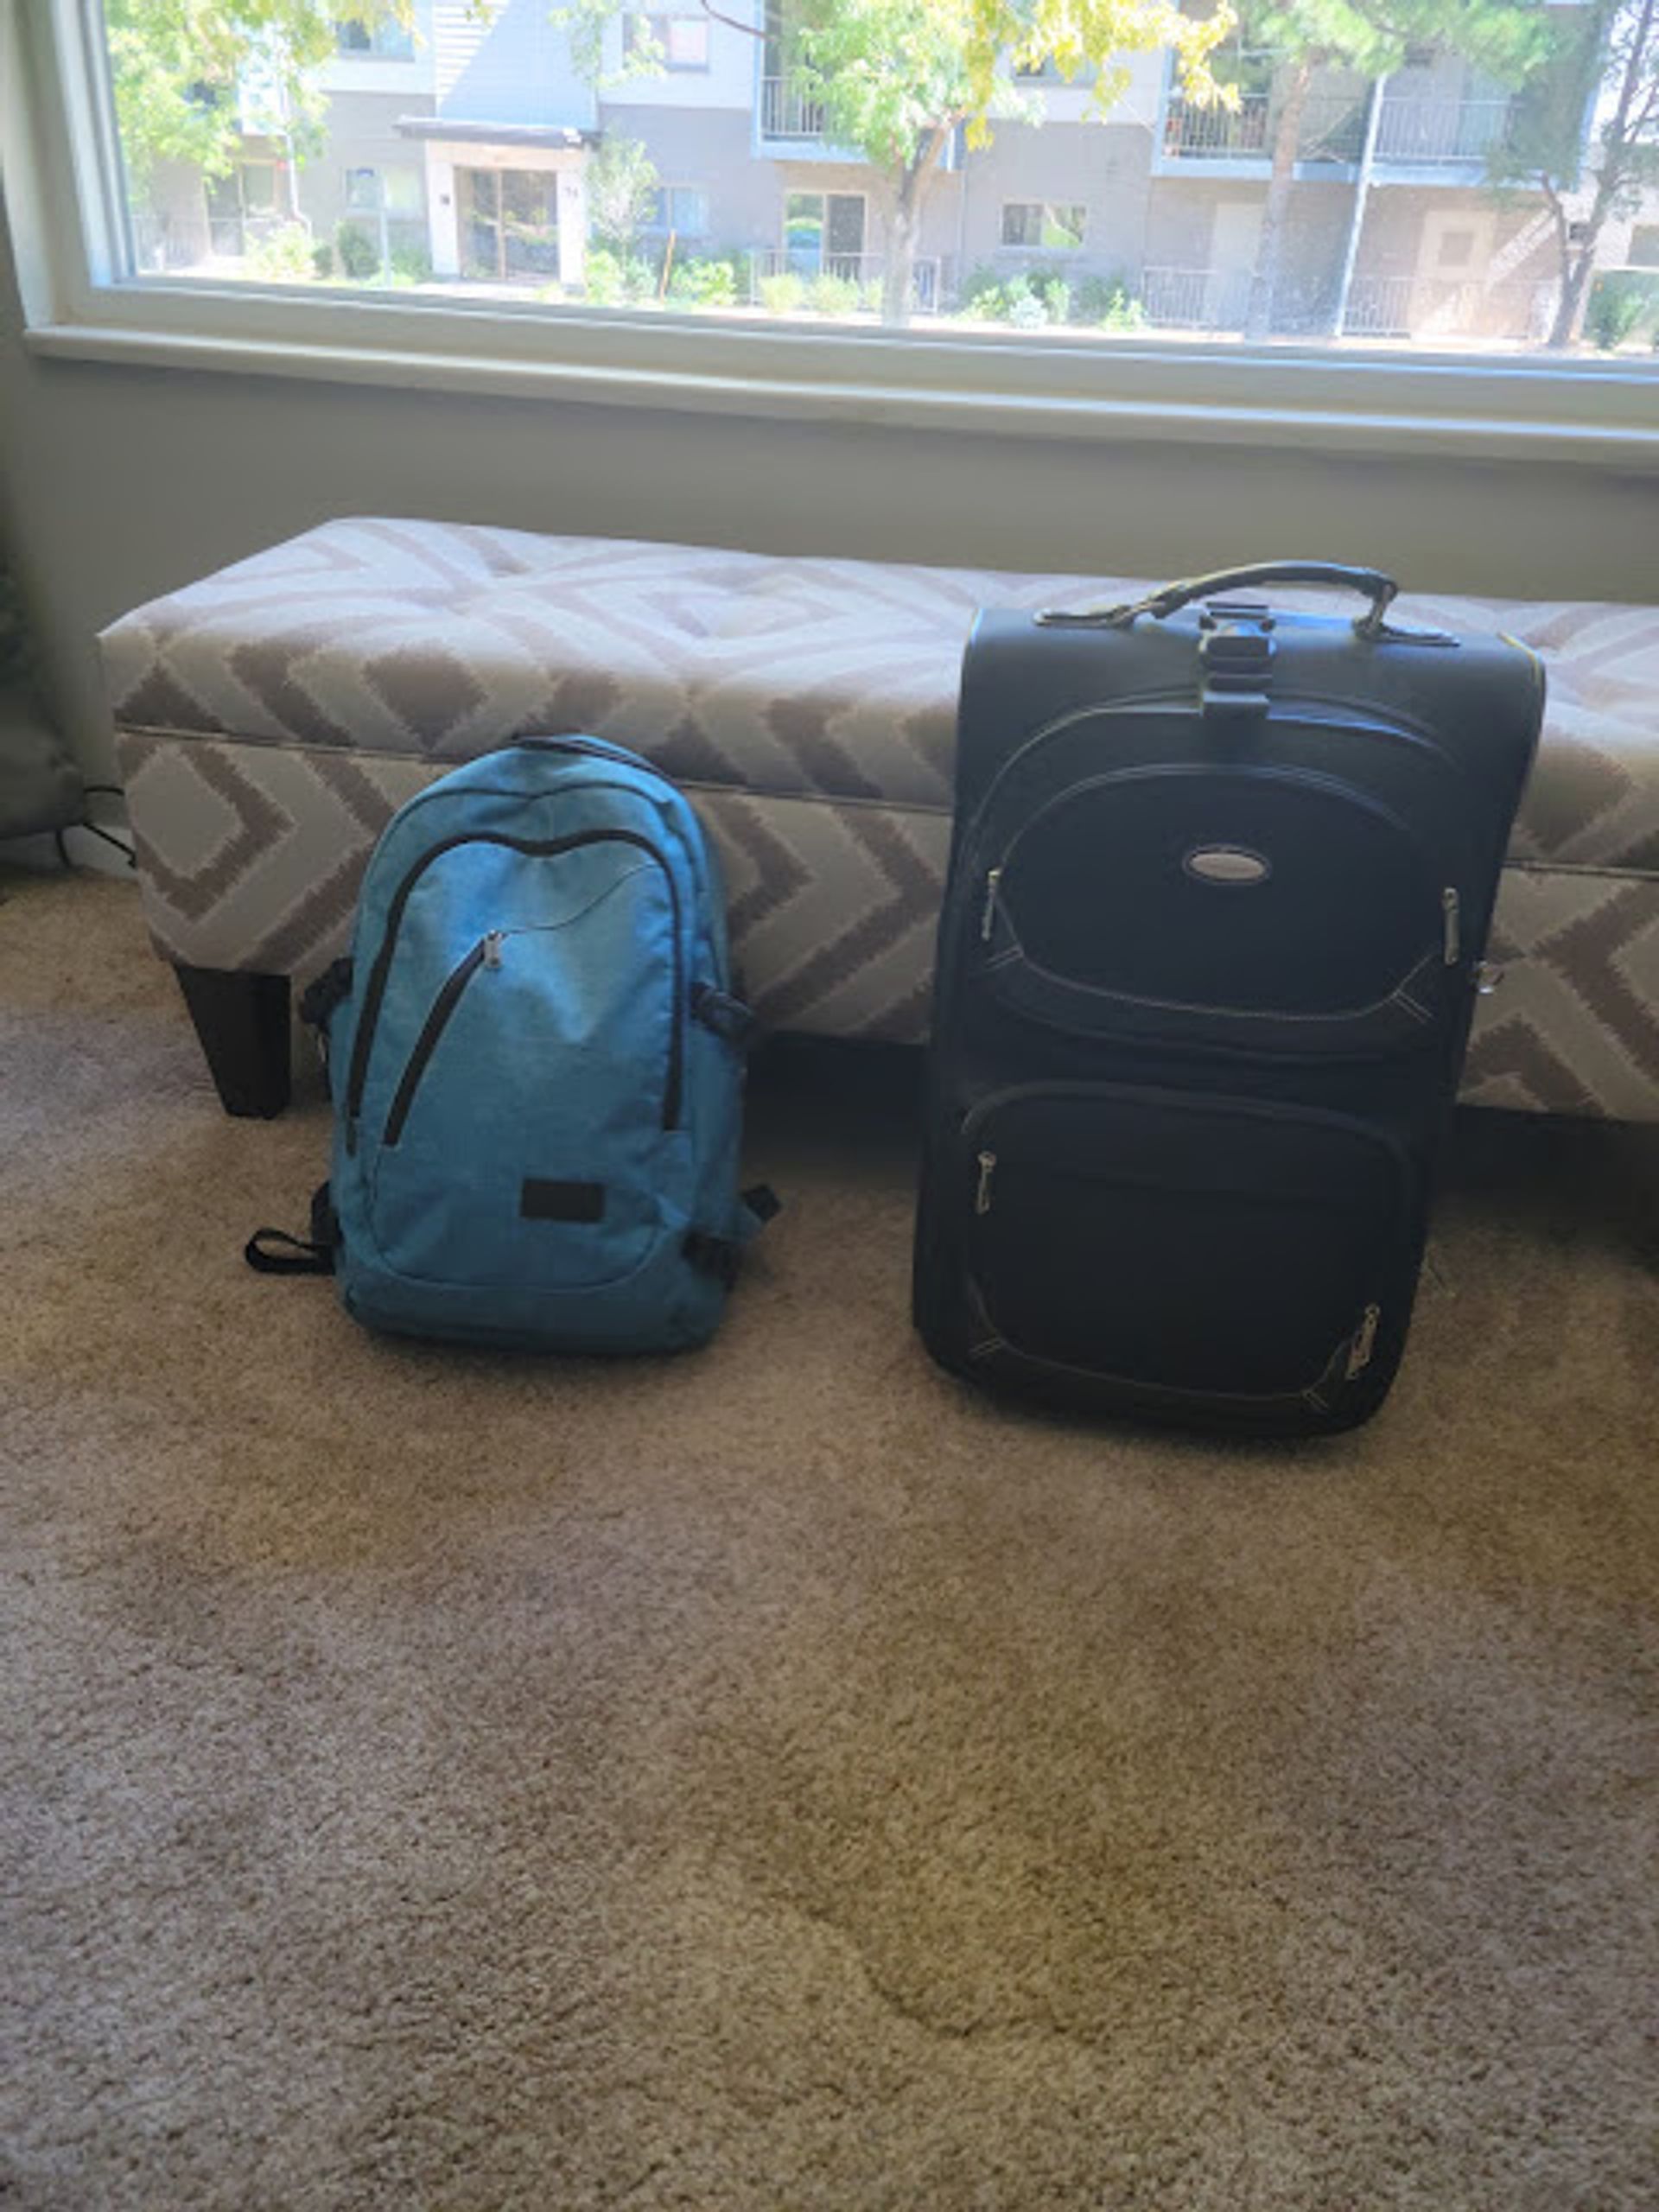 All of my belongings for the foreseeable future